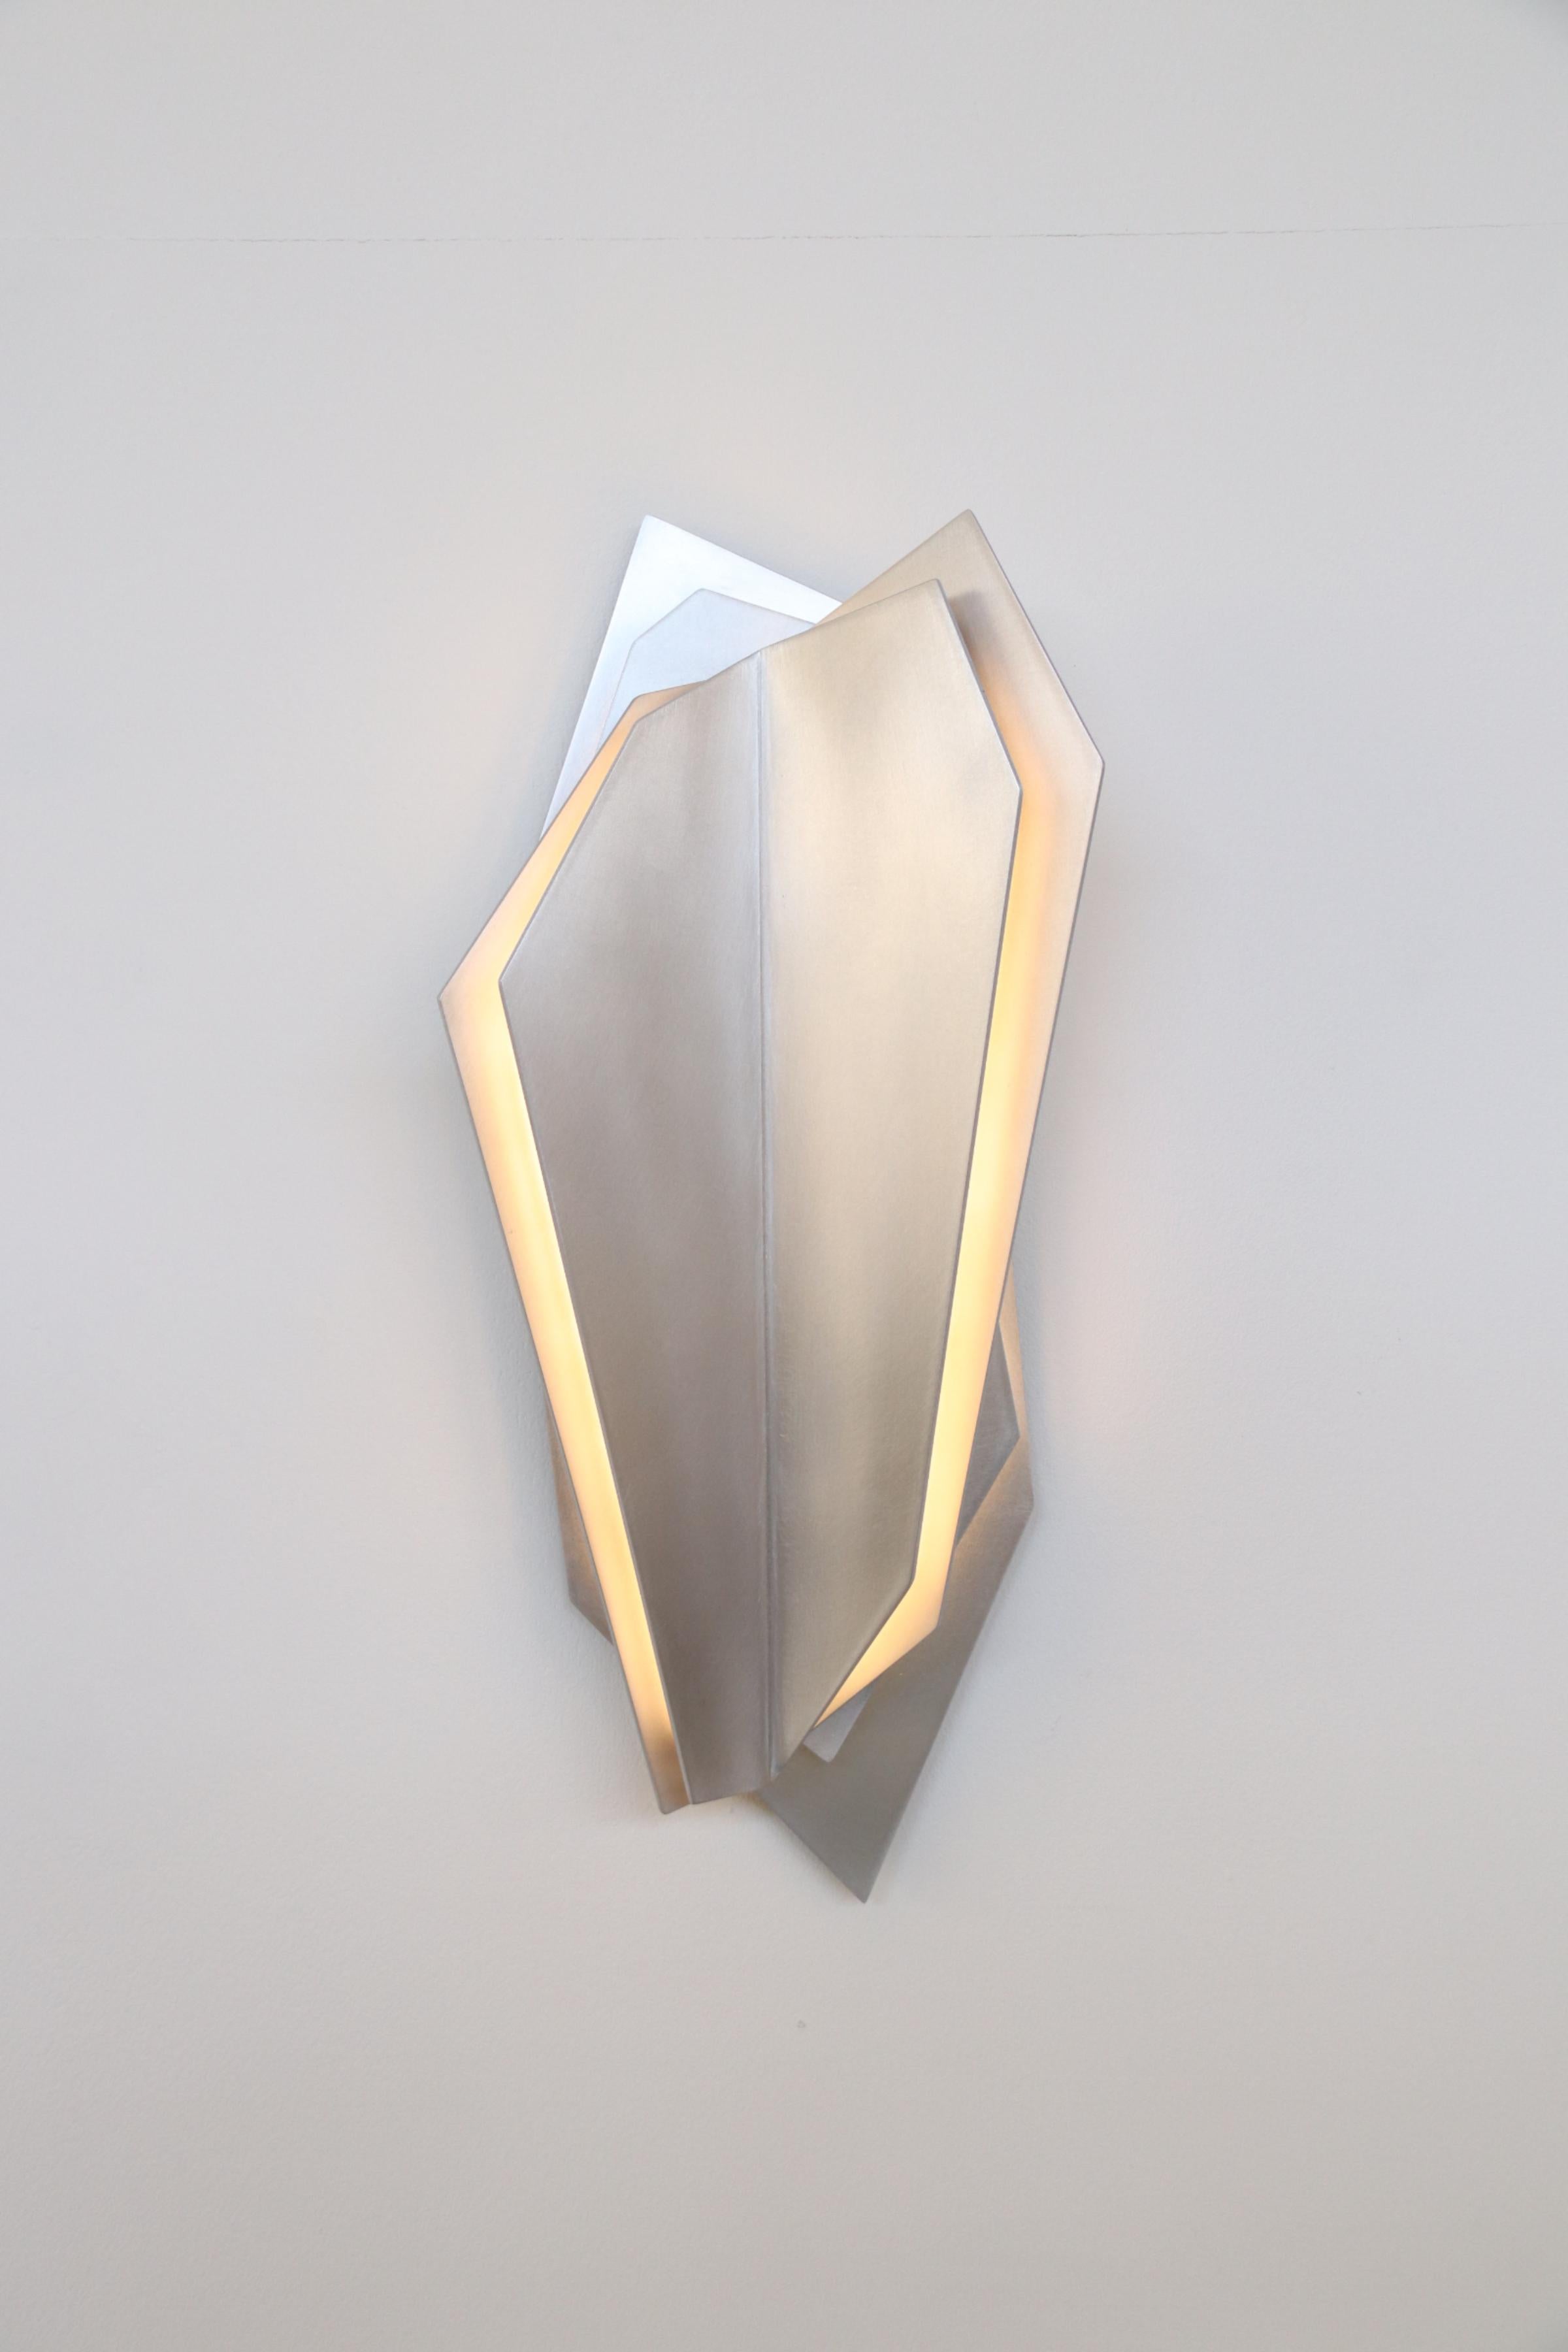 Continuum 500 Wall Sconce by Lost Profile Studio
Dimensions: W 22 x D 9 x H 50 cm 
Materials: Brass, Glass, Aluminium, LED
Finishes:
Aged Brass (waxed)
Blonde Brass (waxed)
Brushed Aluminium (waxed)
Dark Bronze (waxed))

Notes: 12v light fixture,